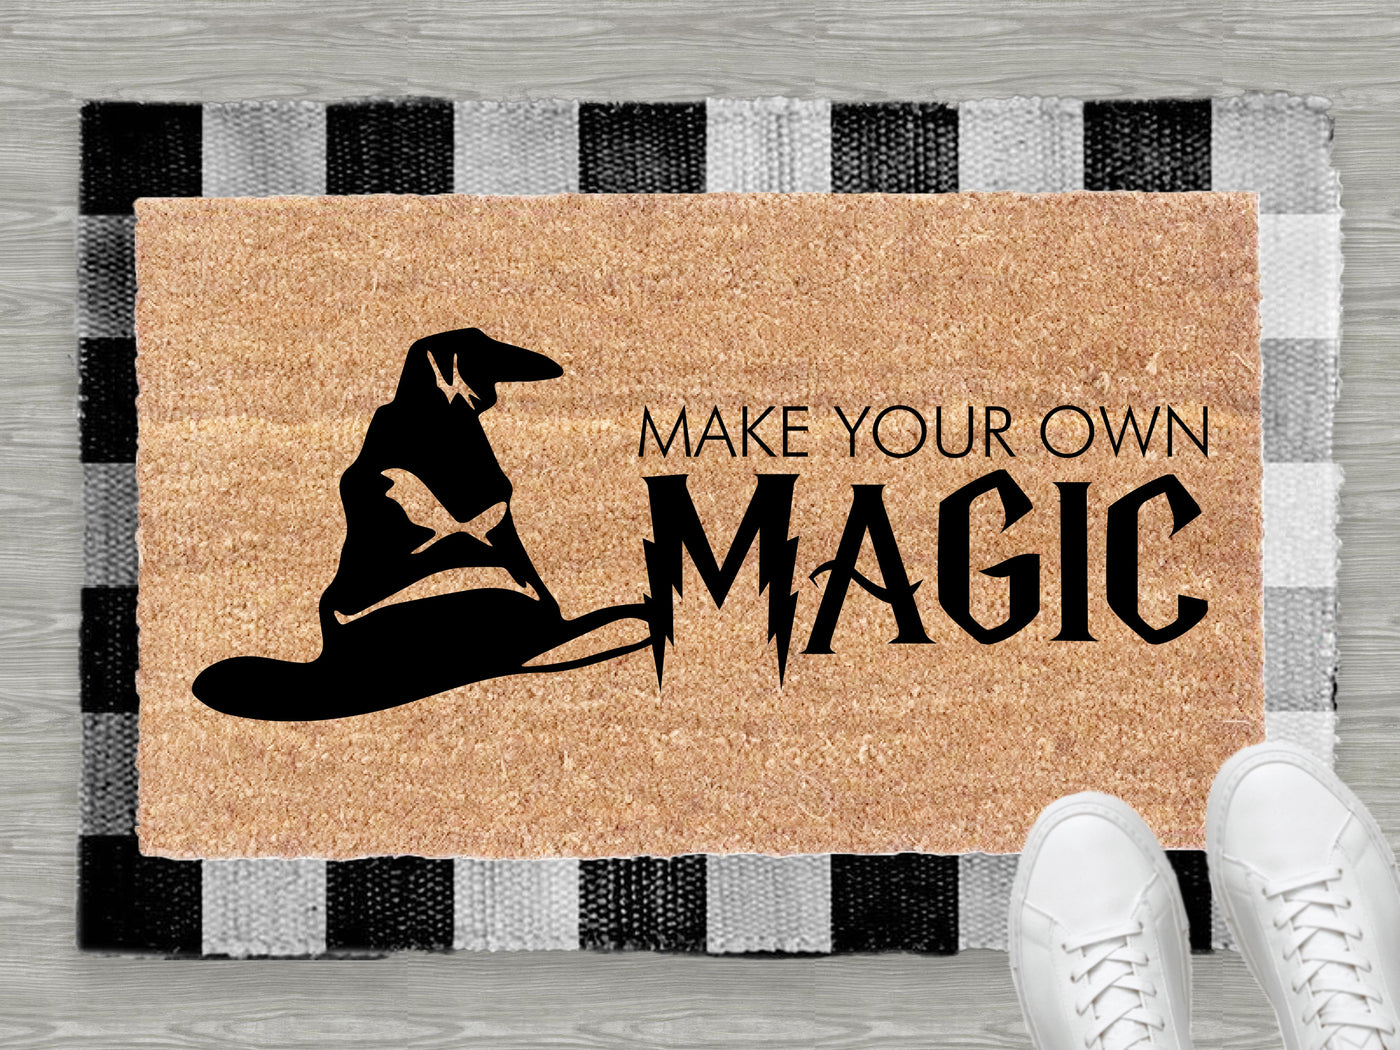 Make Your Own Magic